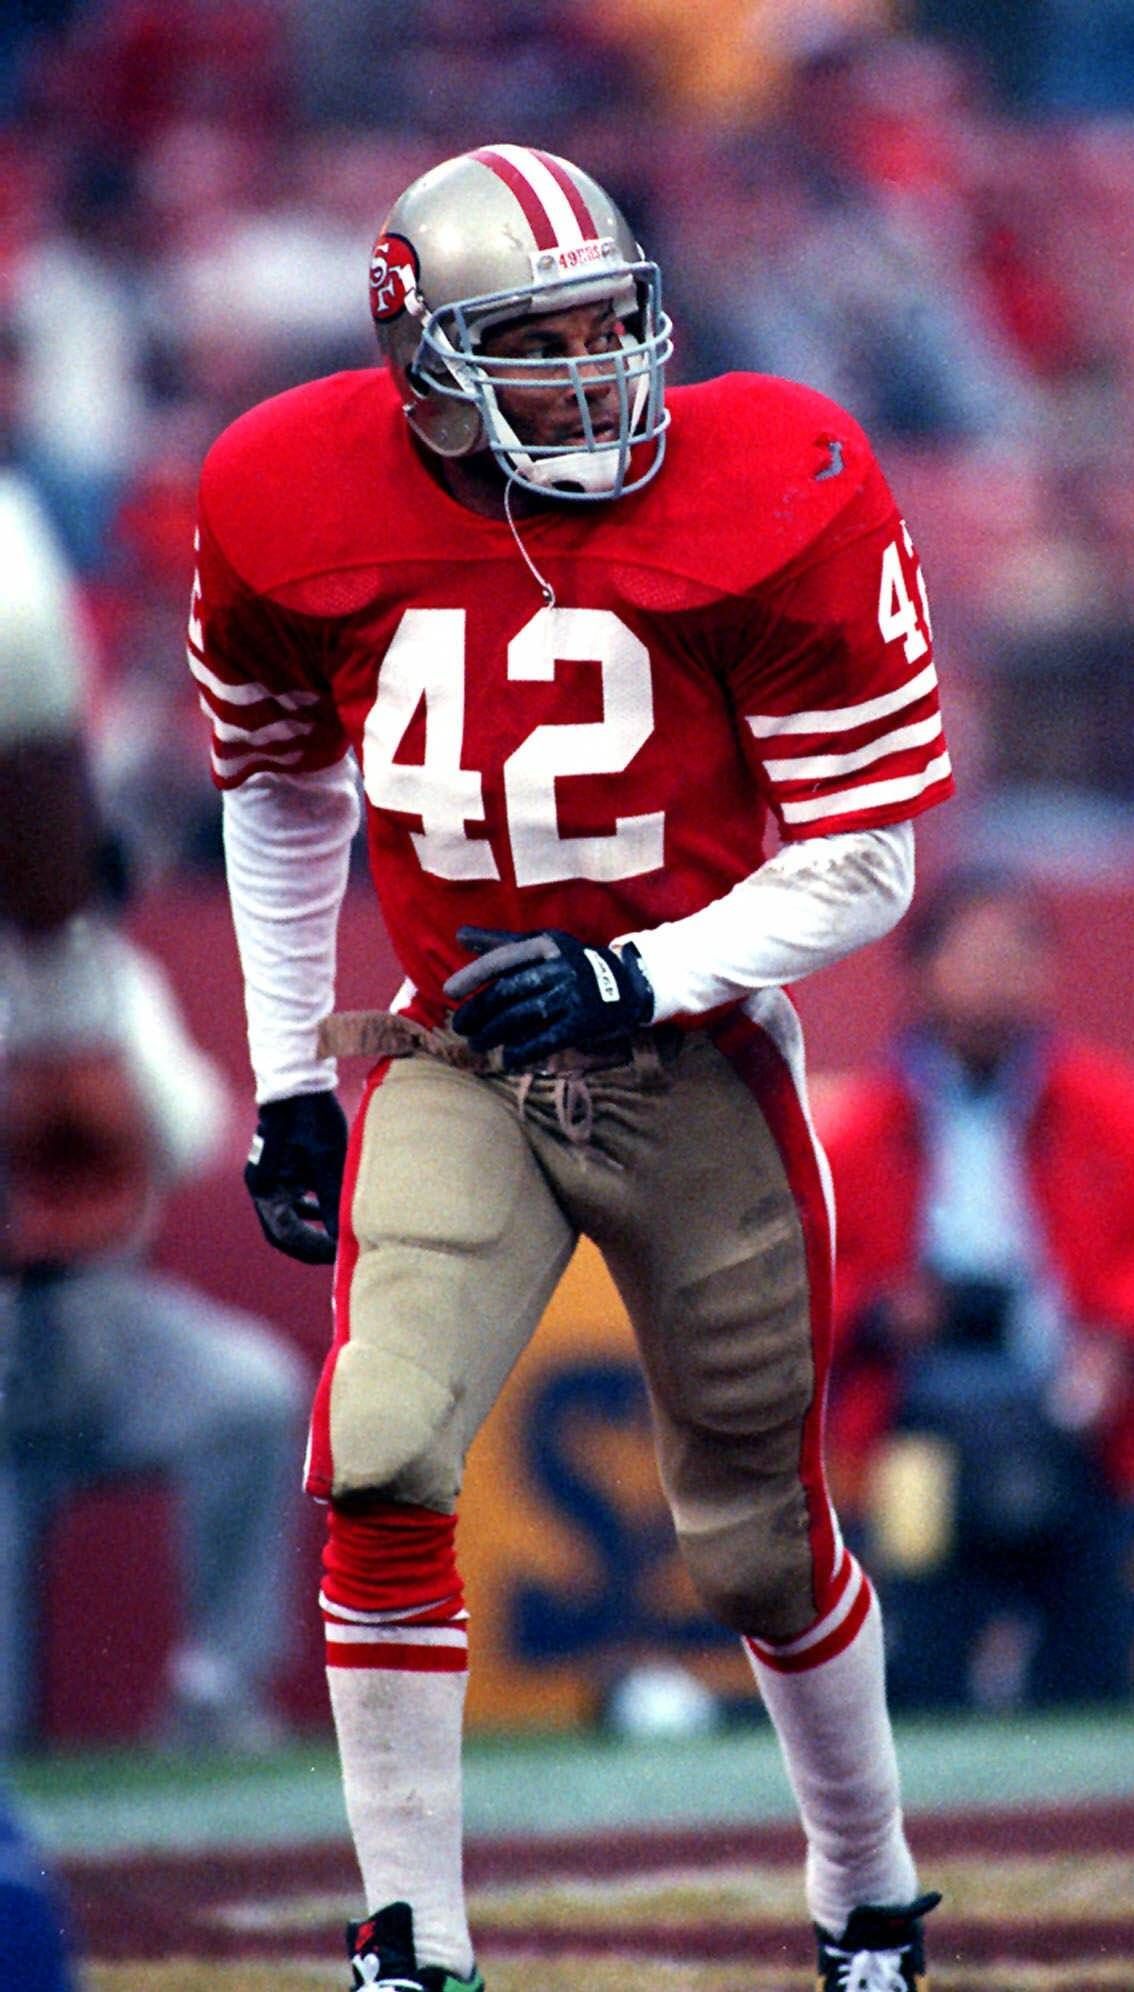 Ronnie Lott Quotes in 2021ers football, Ronnie lott, Nfl